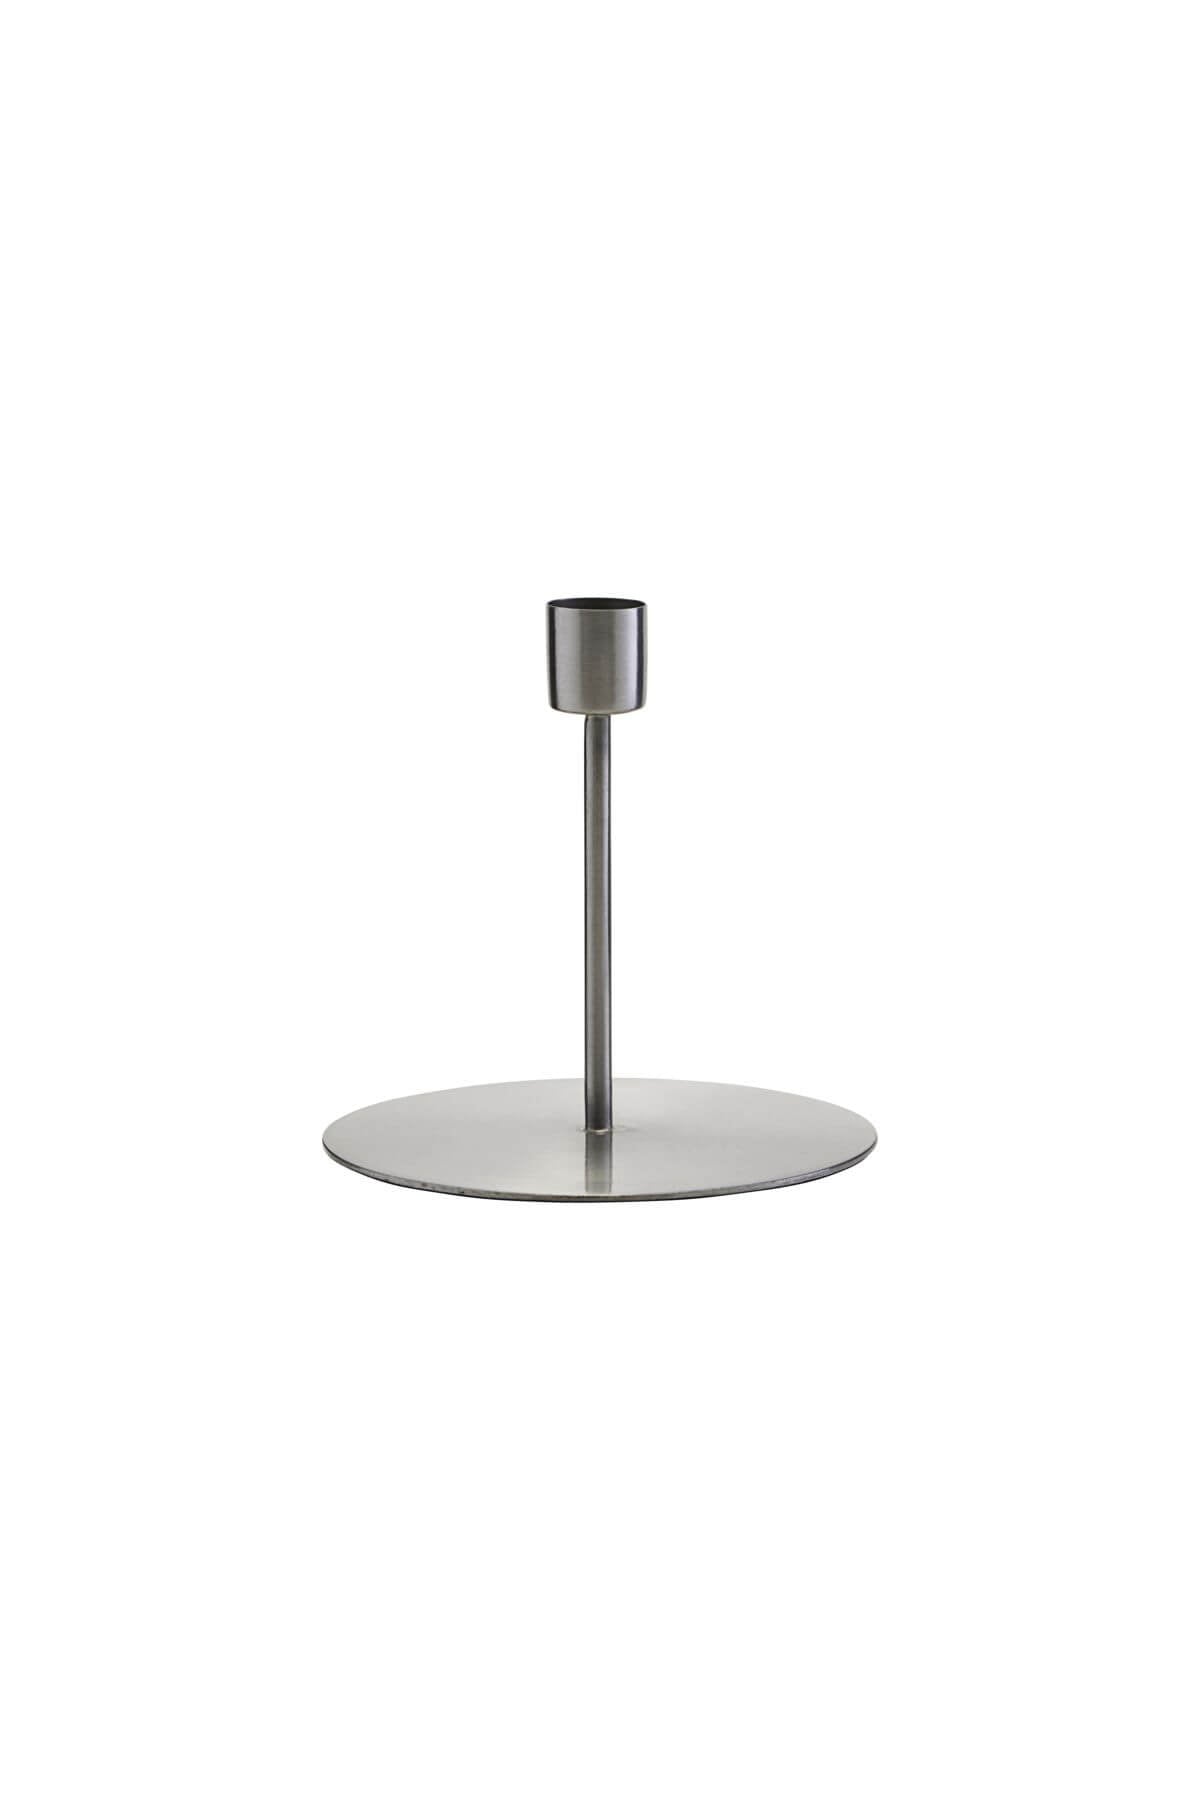 House Doctor Anit Candlestick Silver 12cm